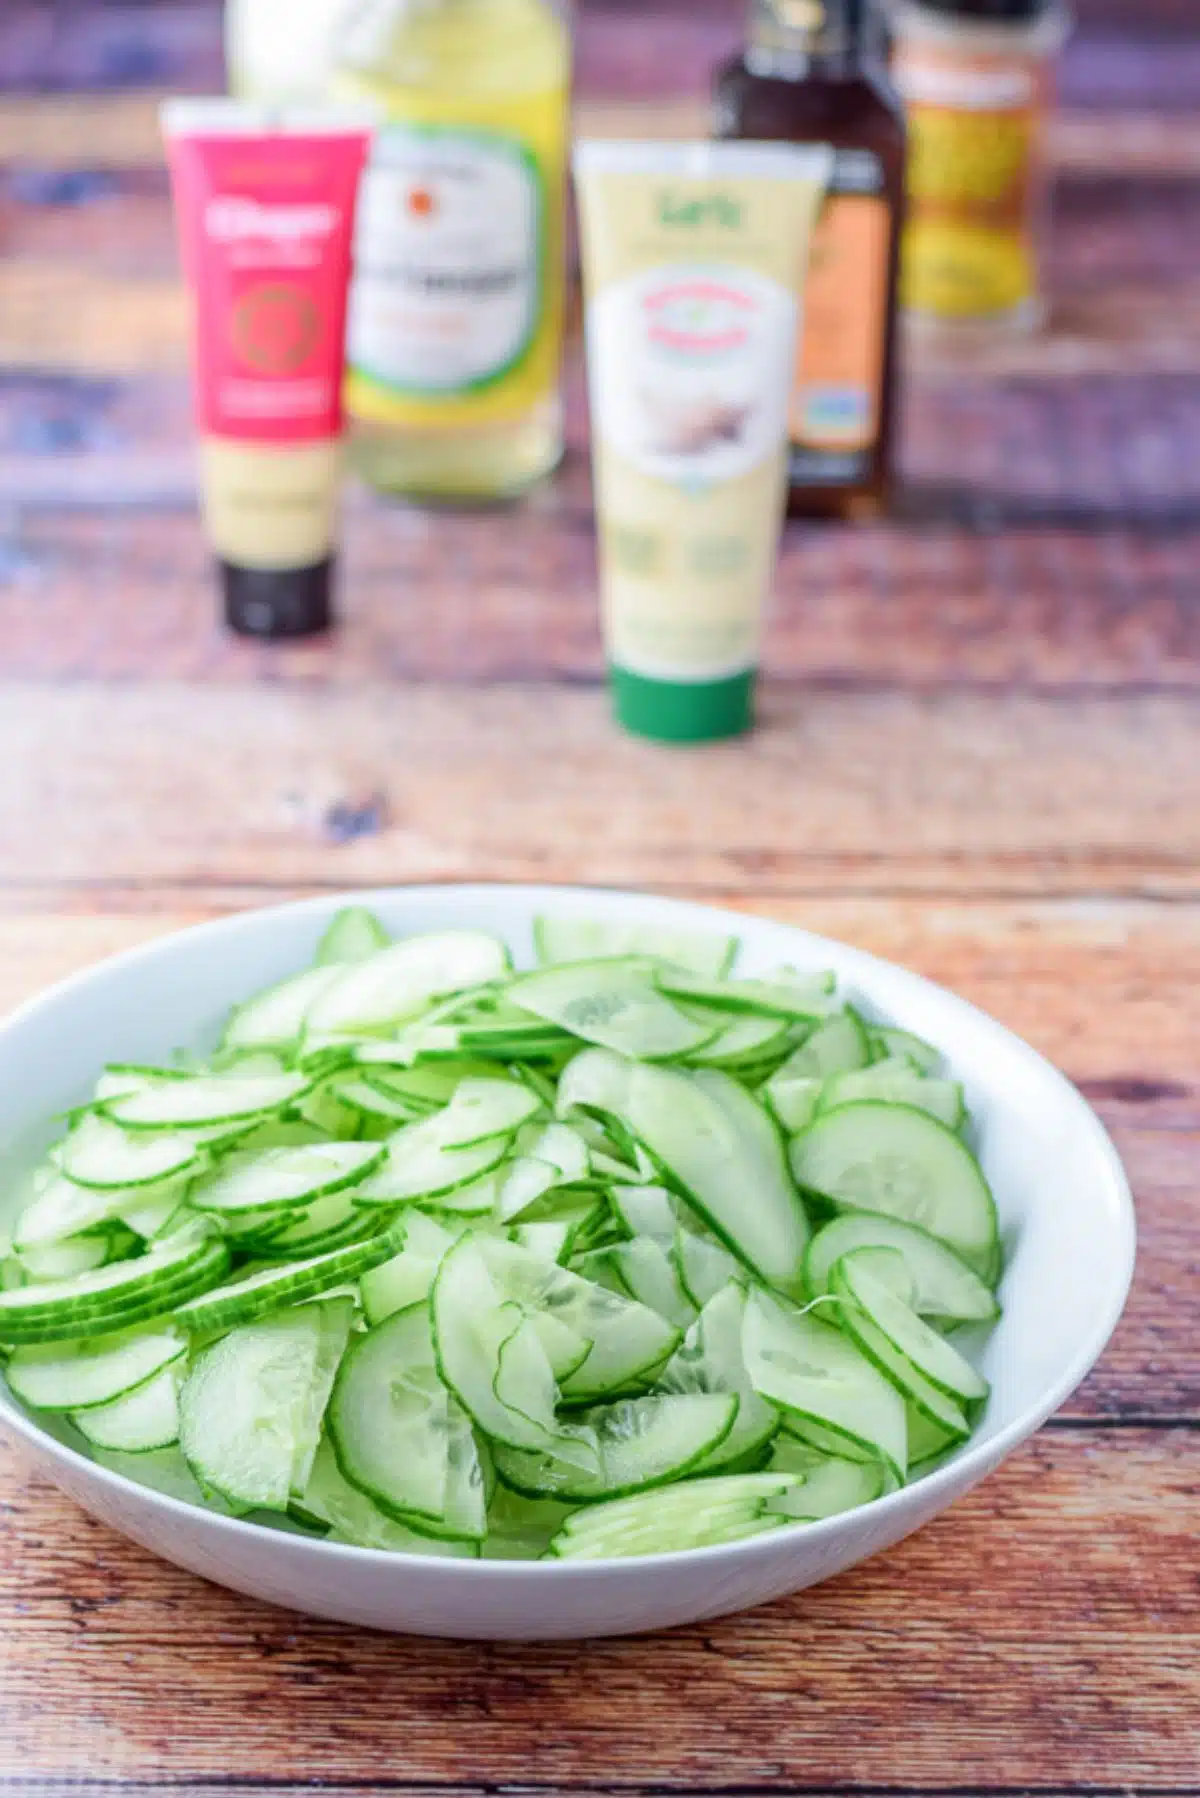 English cucumber sliced real thin and in a white bowl with dressing ingredients in the background